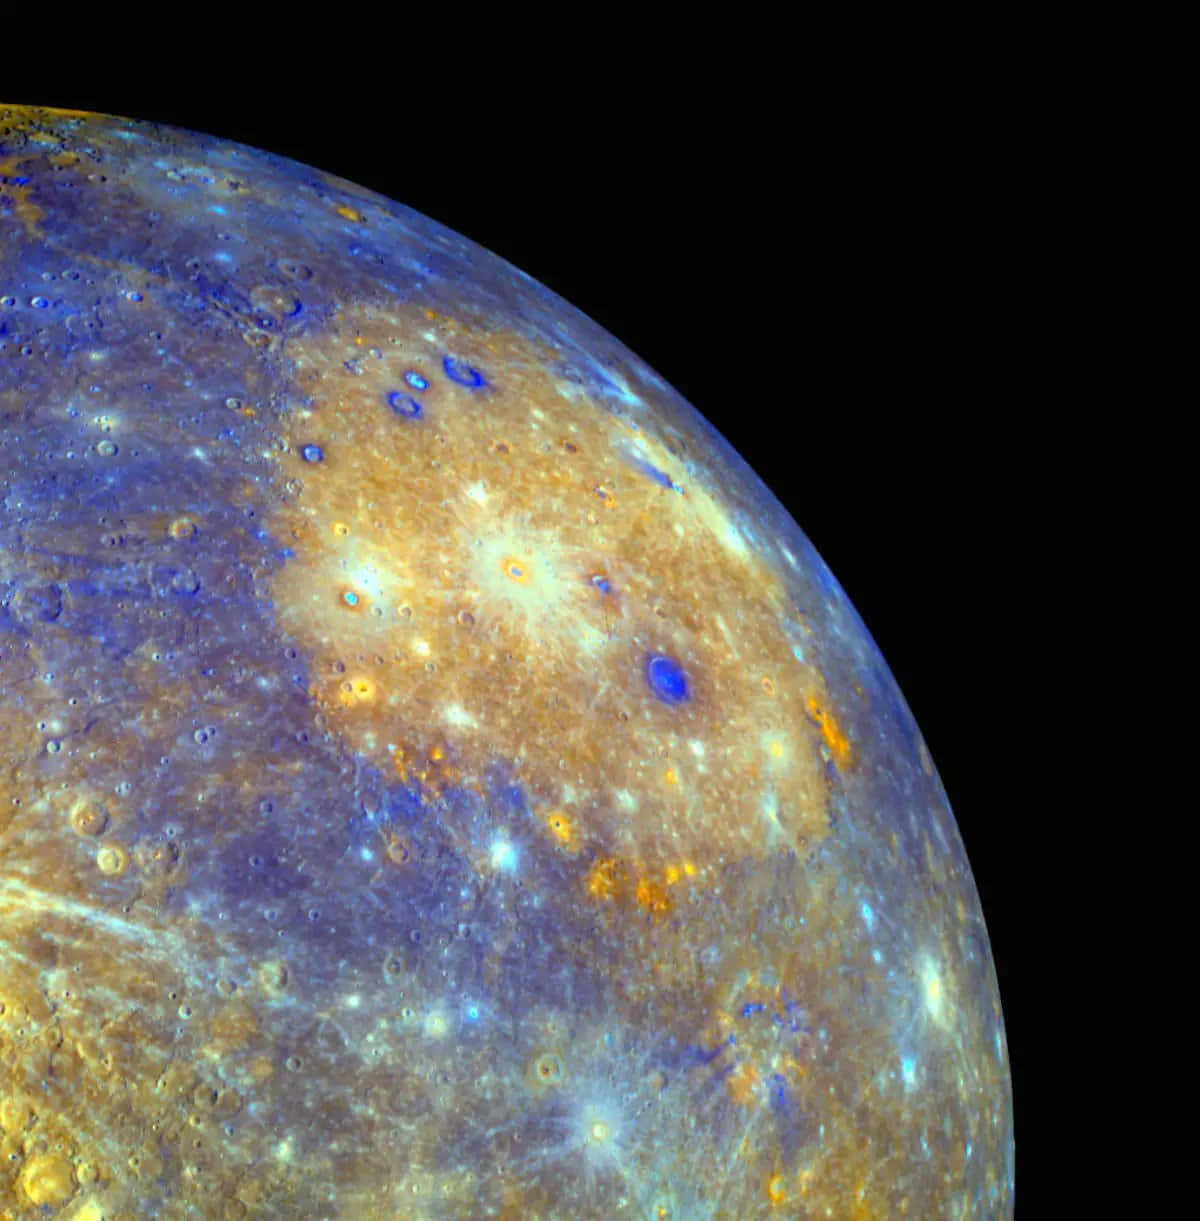 Mercury, the innermost planet of the Solar System